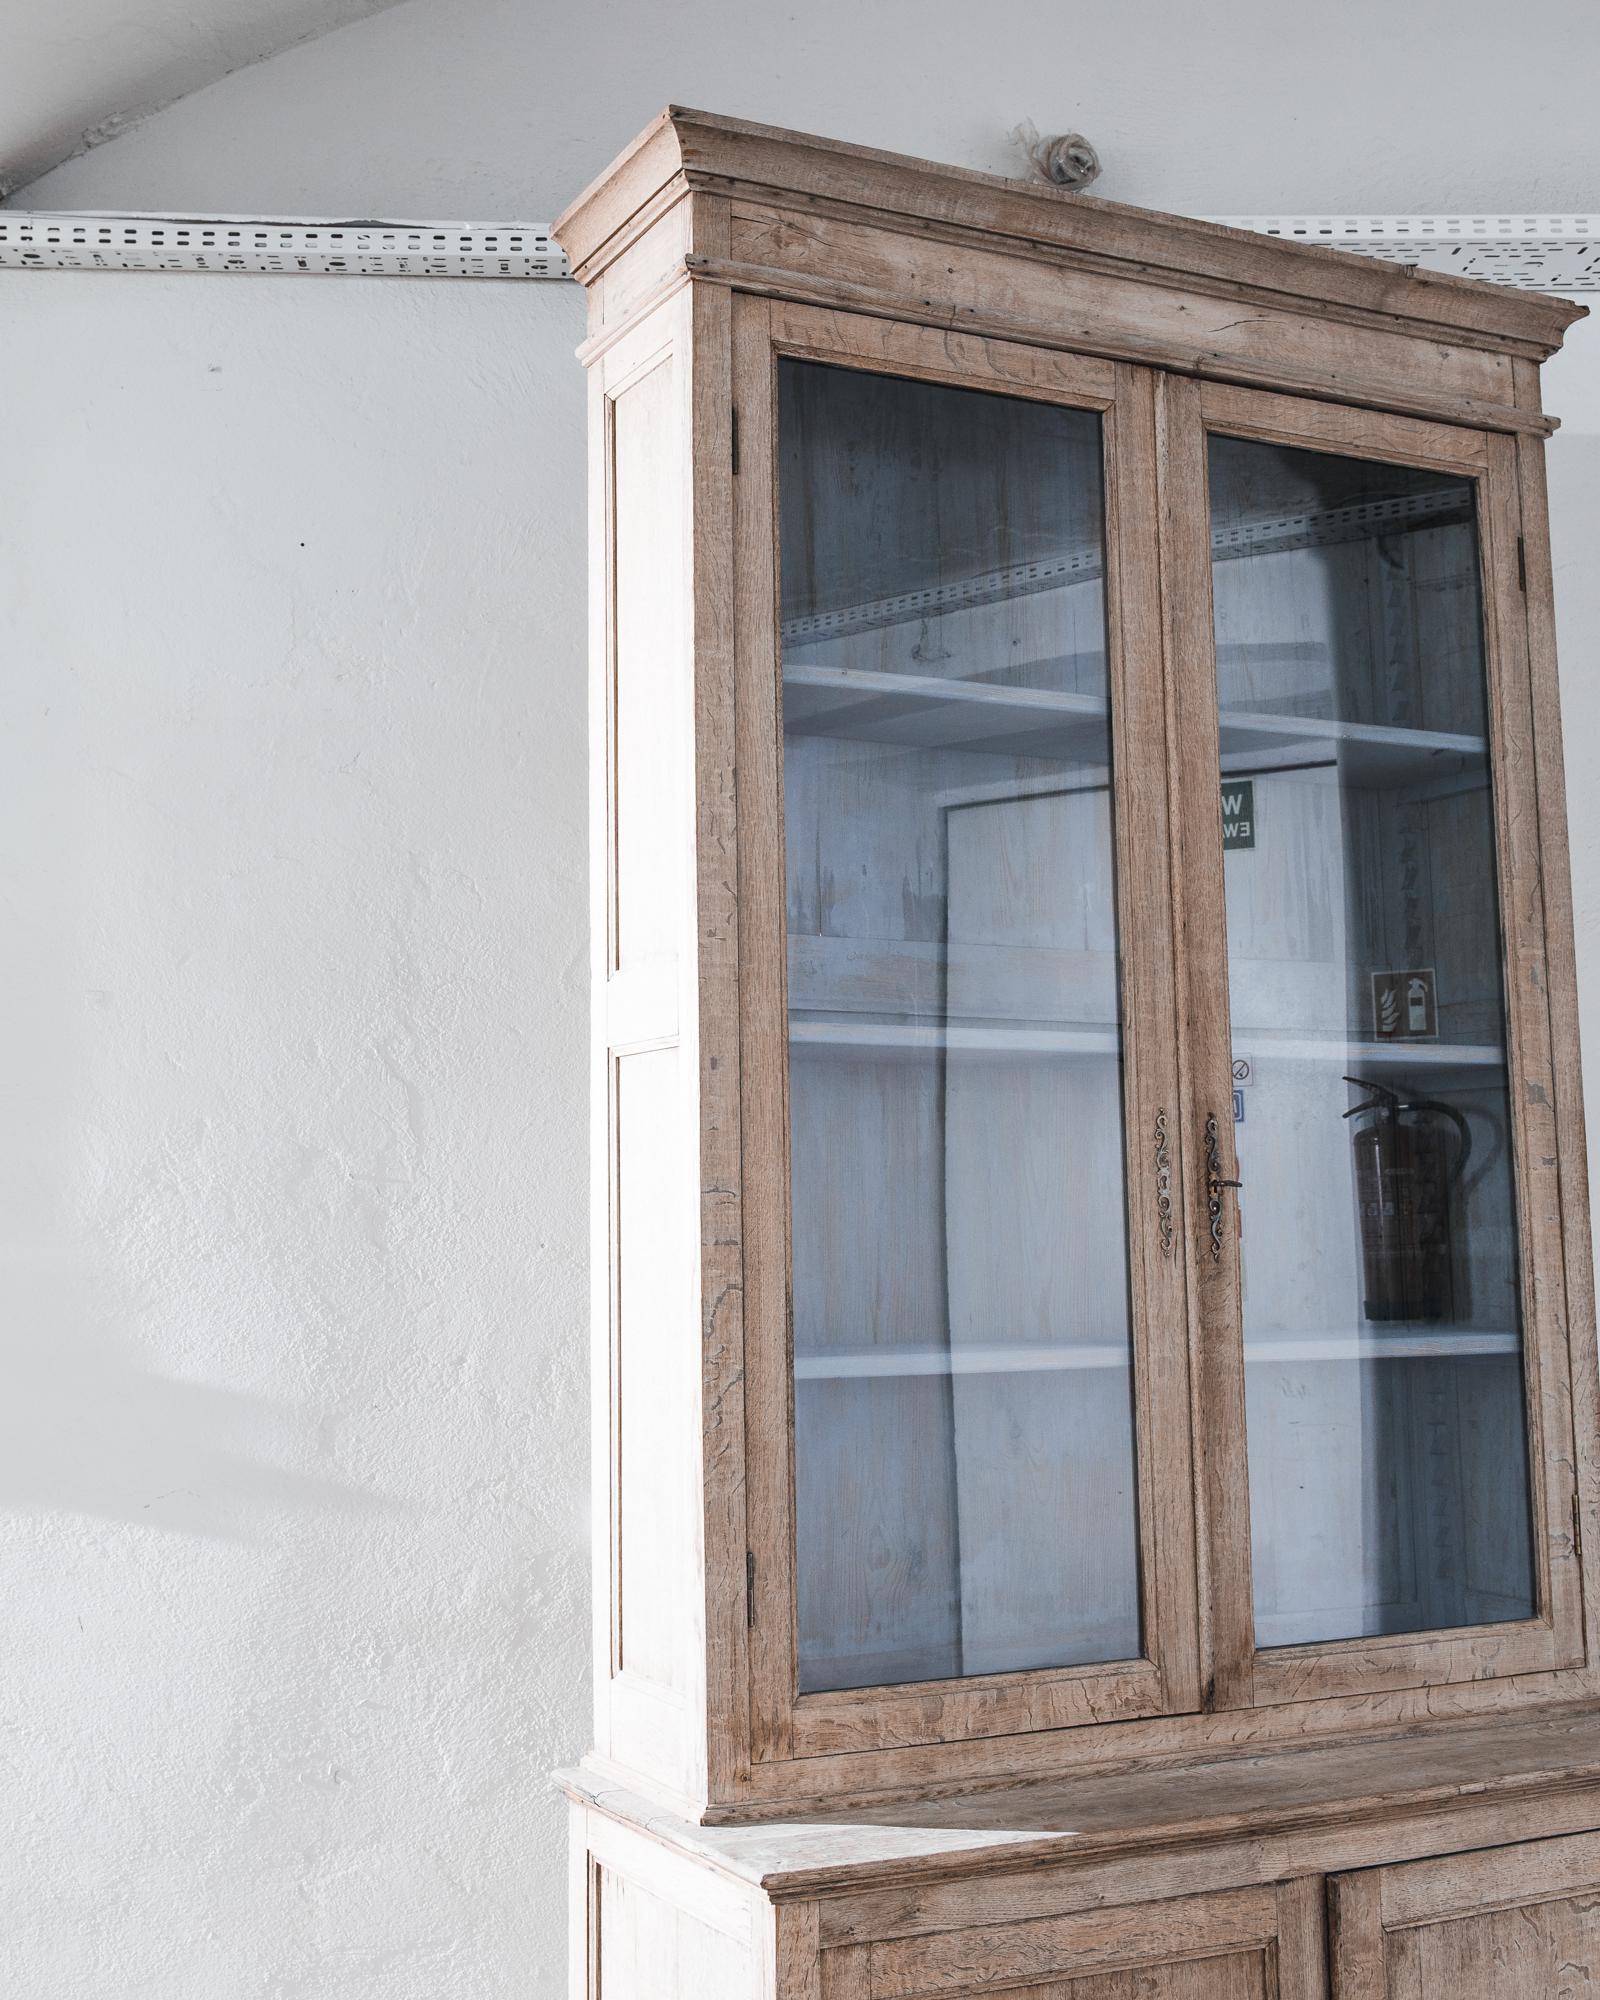 French Provincial 1880s French Bleached Oak Vitrine